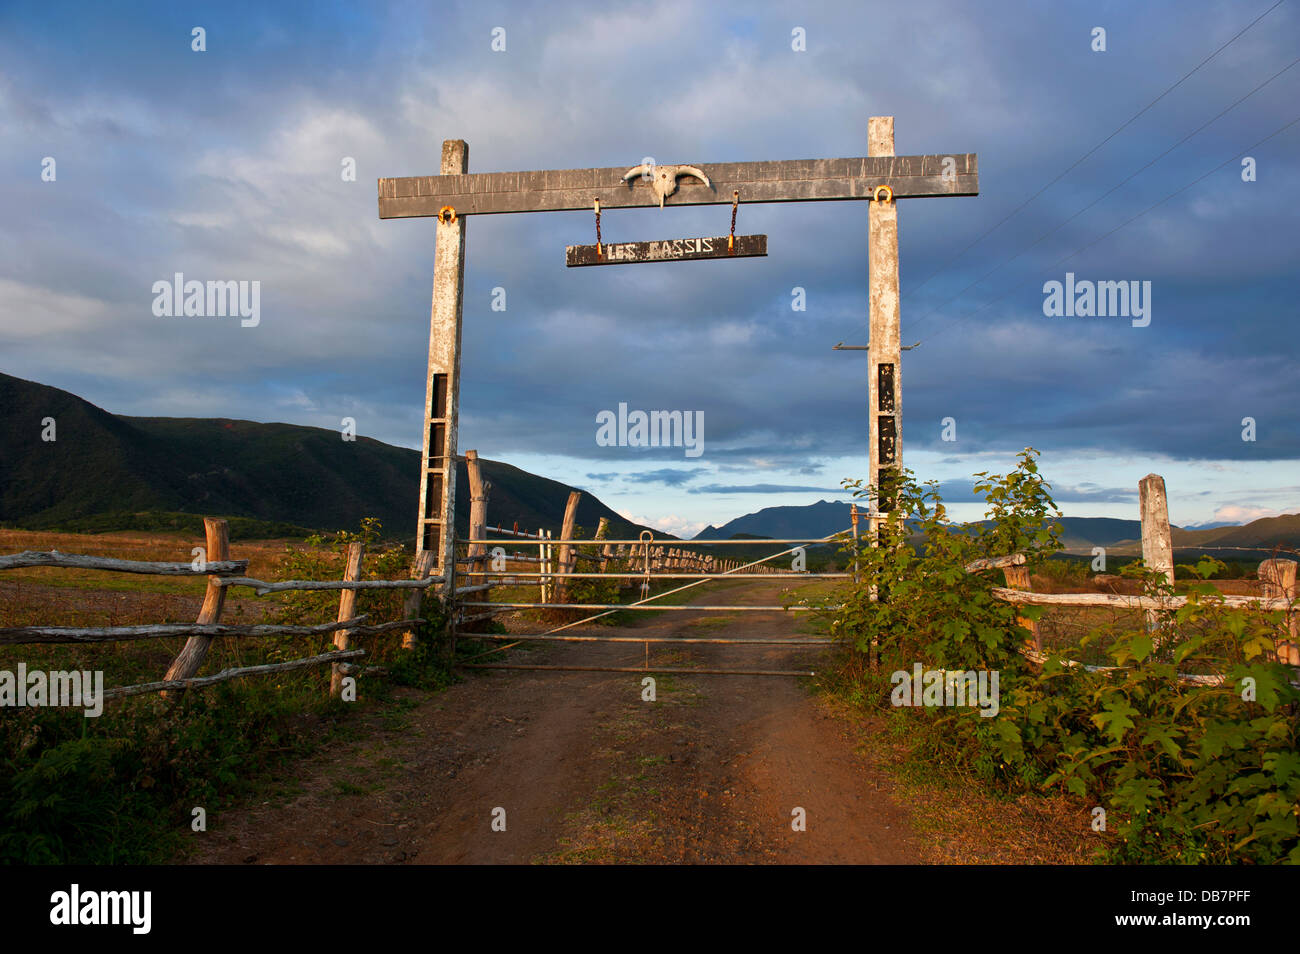 Entrance to a cattle farm Stock Photo